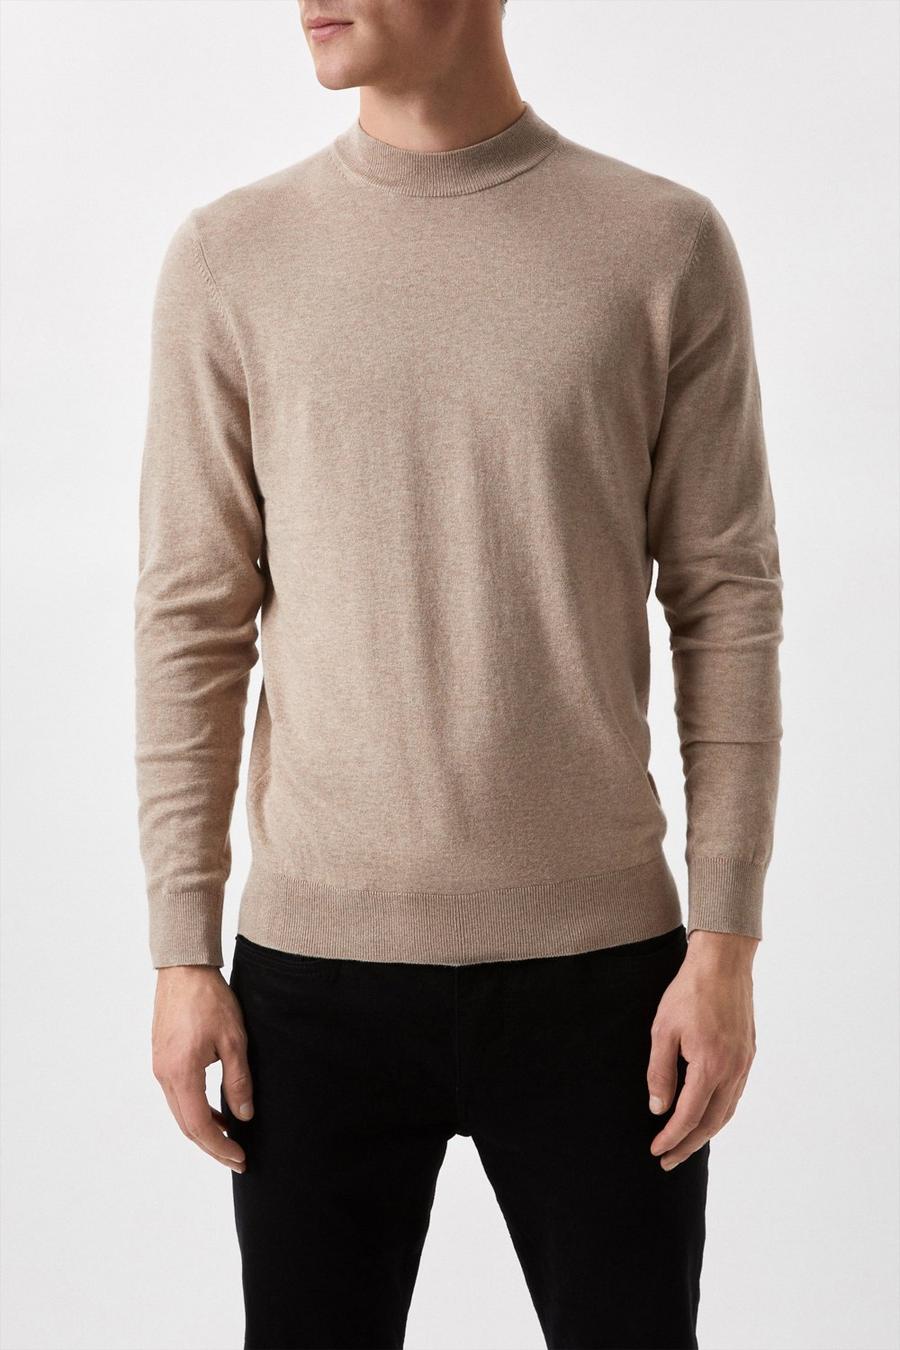 Cotton Rich Stone Knitted Turtle Neck Jumper